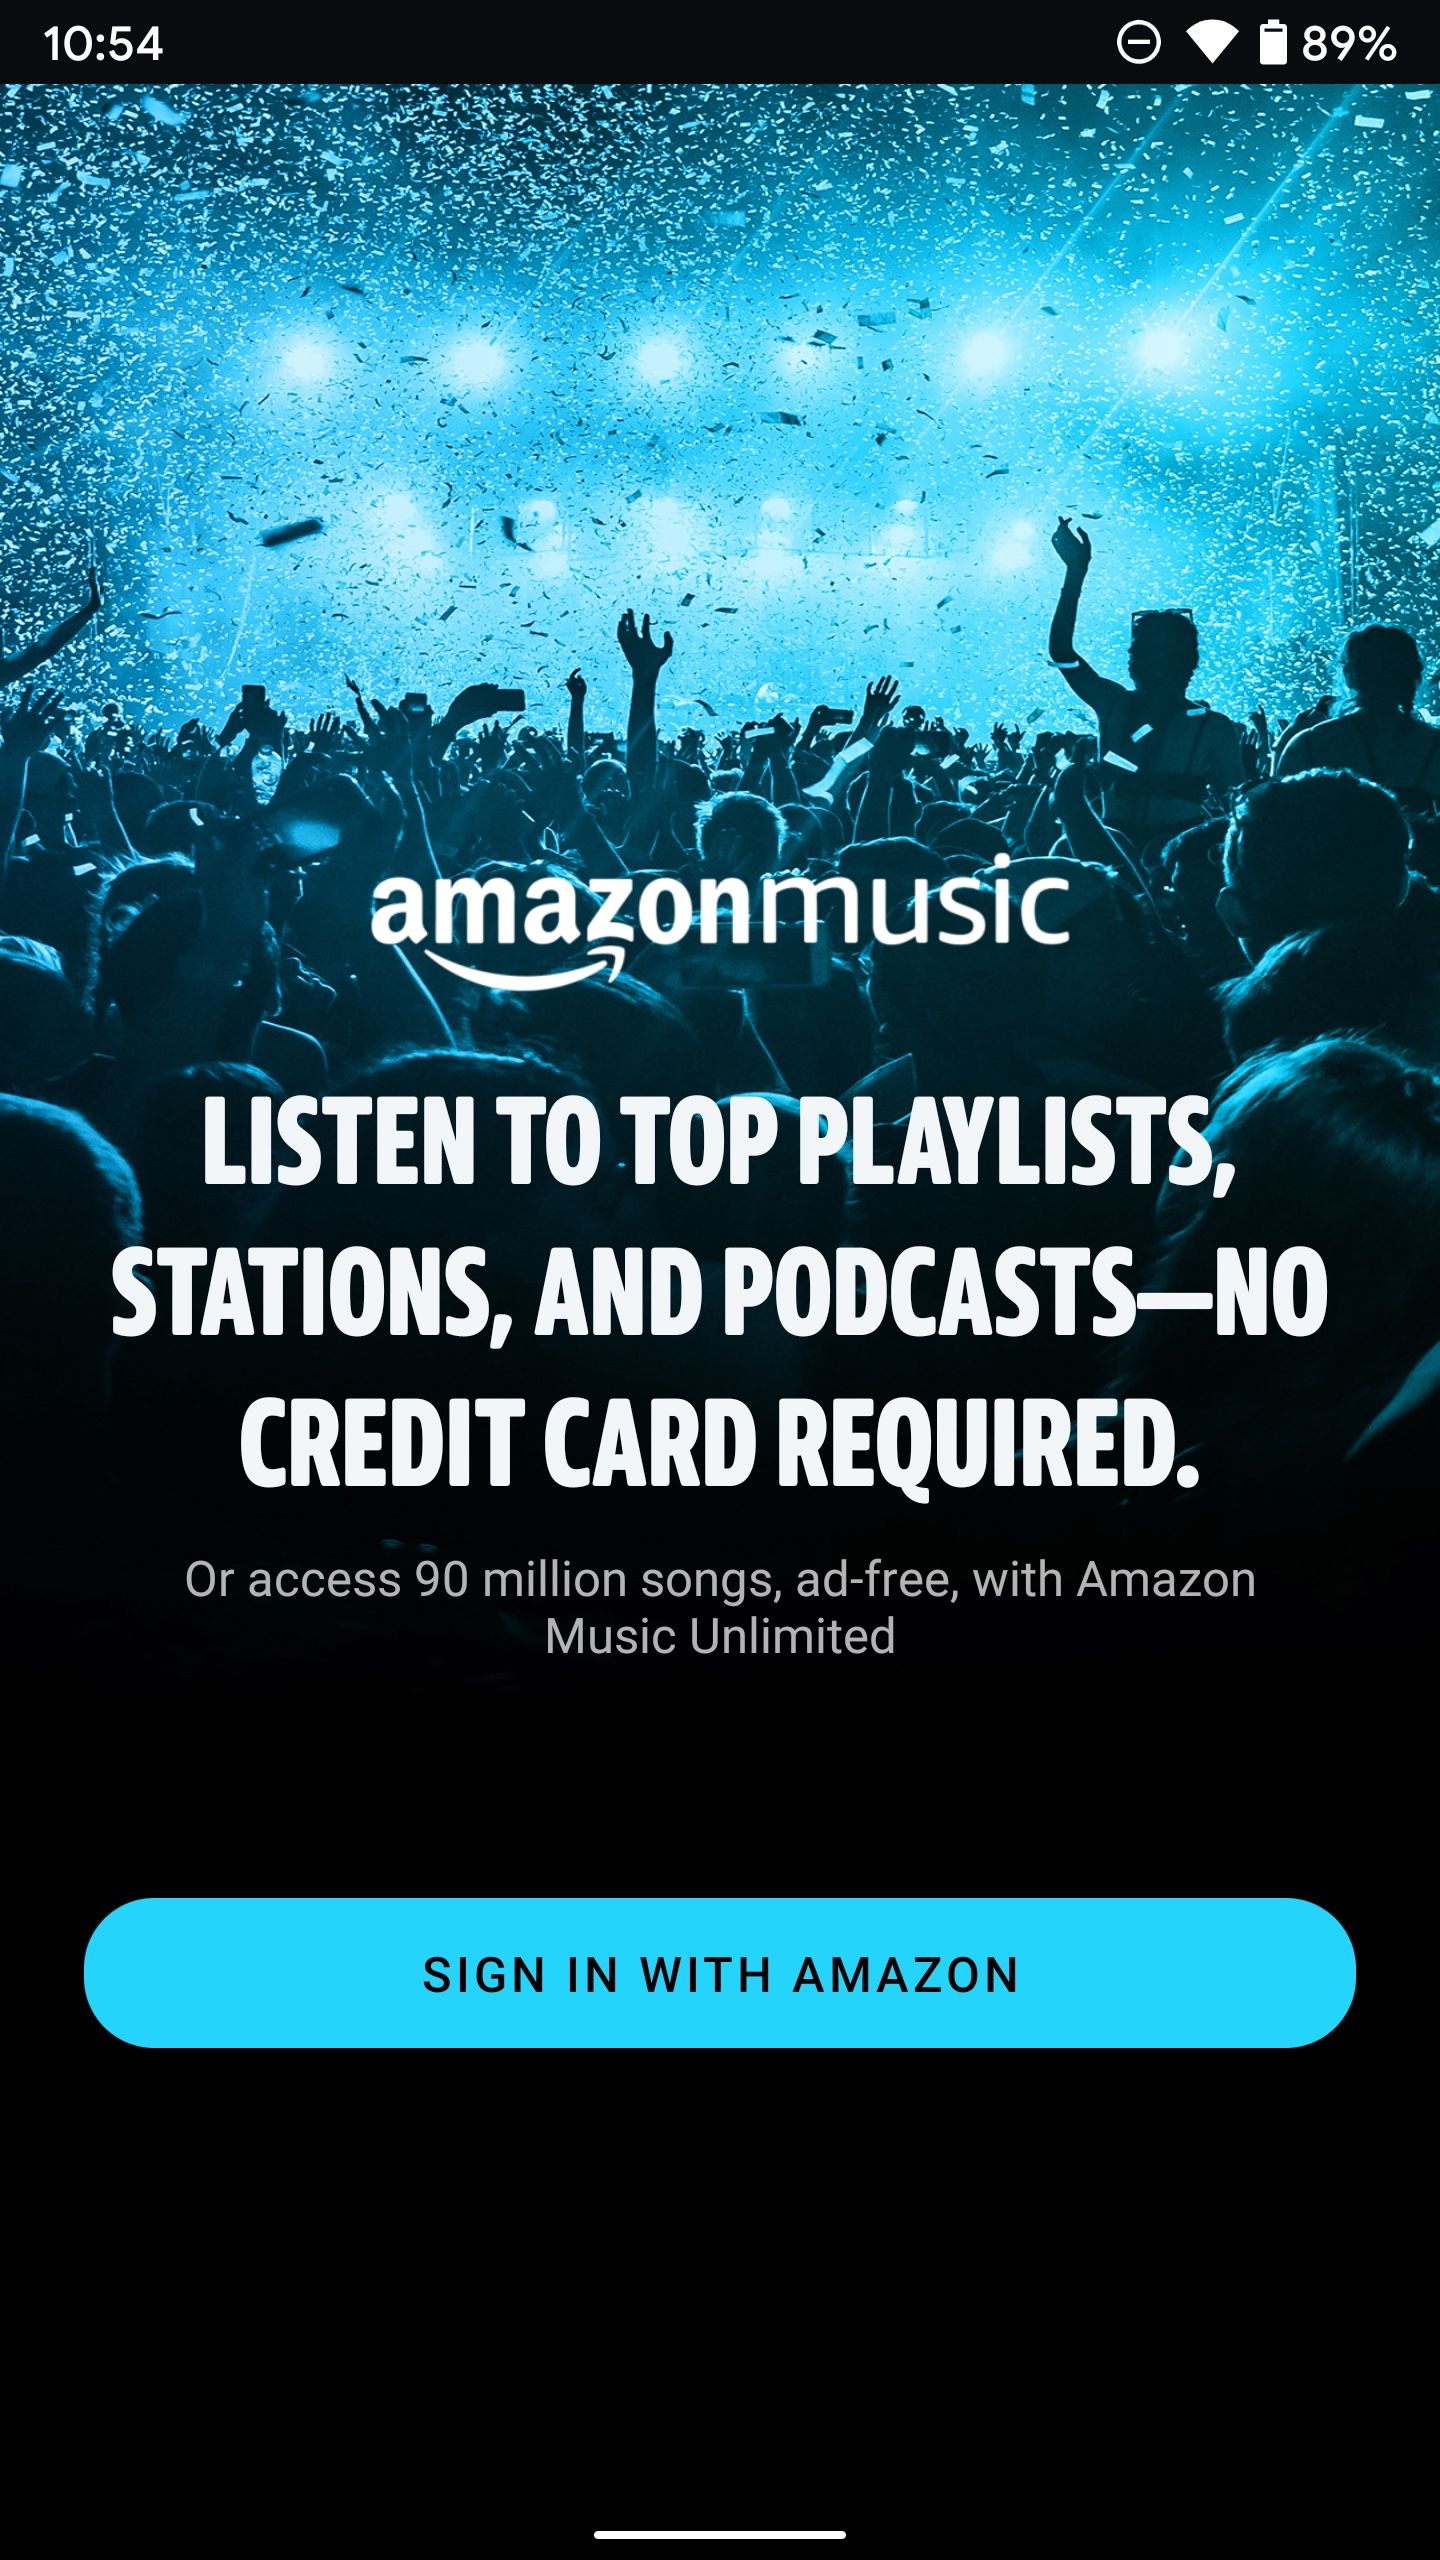 The initial login page of the Amazon Music app.